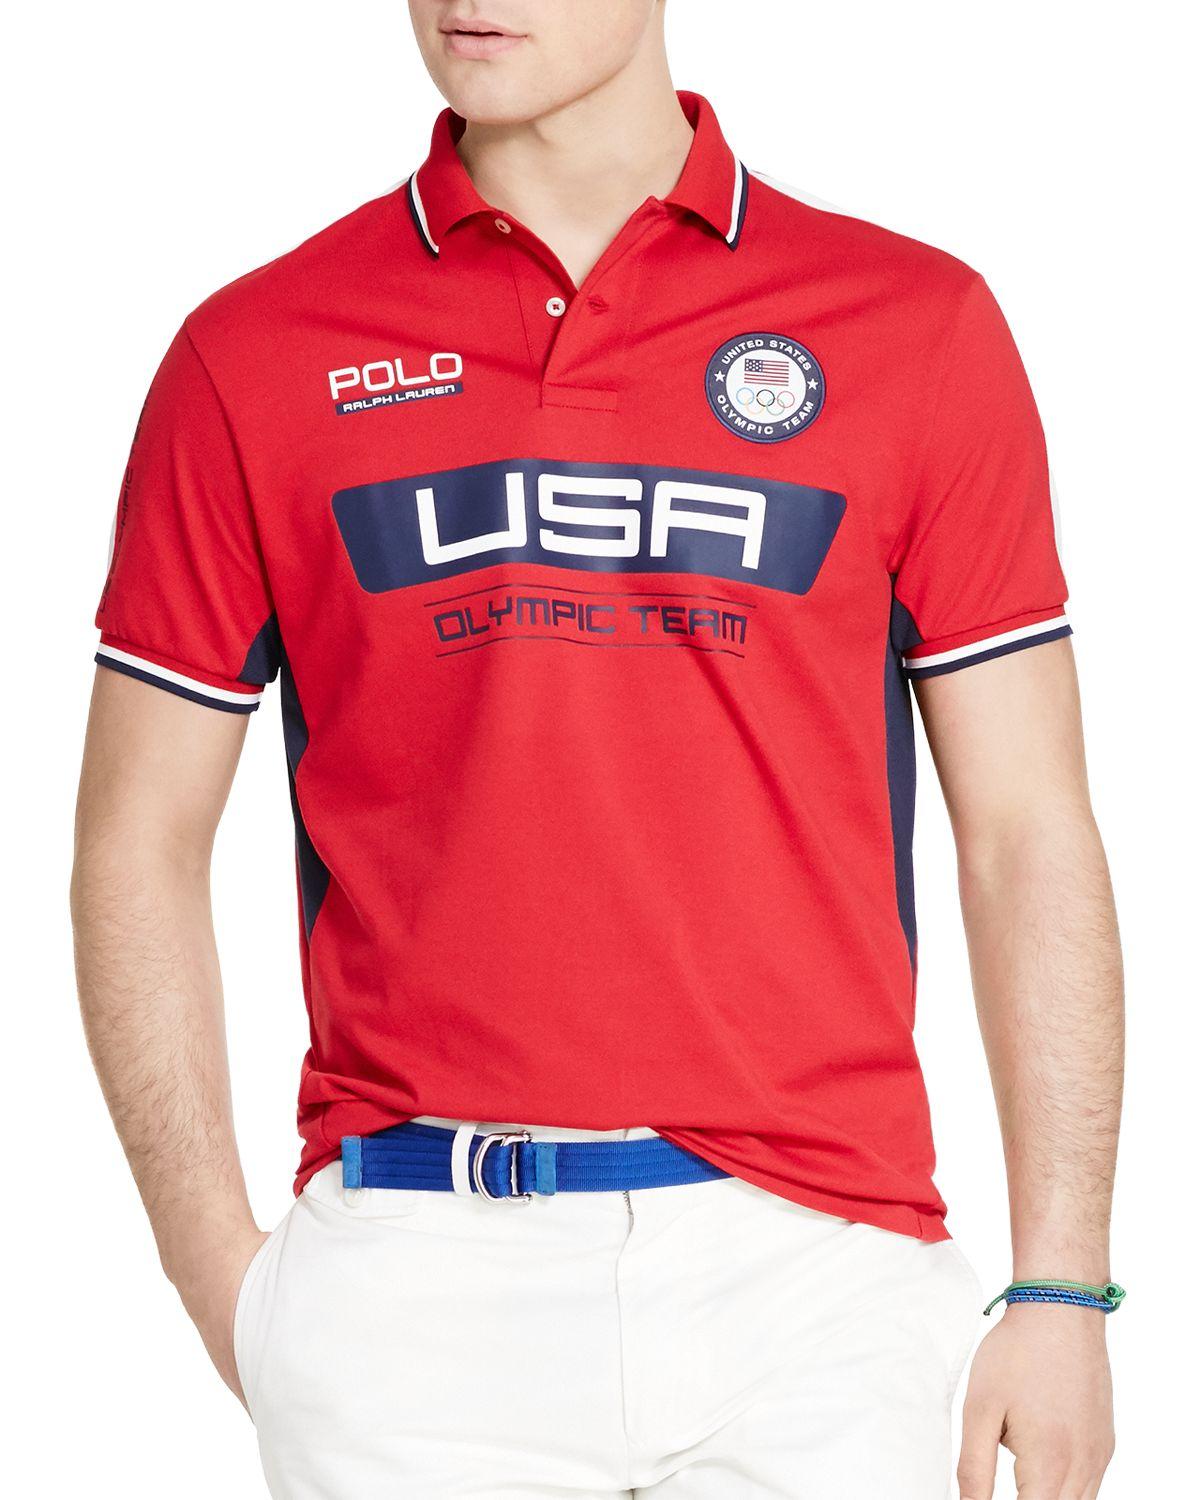 Polo Ralph Lauren Team USA Custom-Fit Polo Shirt in Red for Men - Lyst